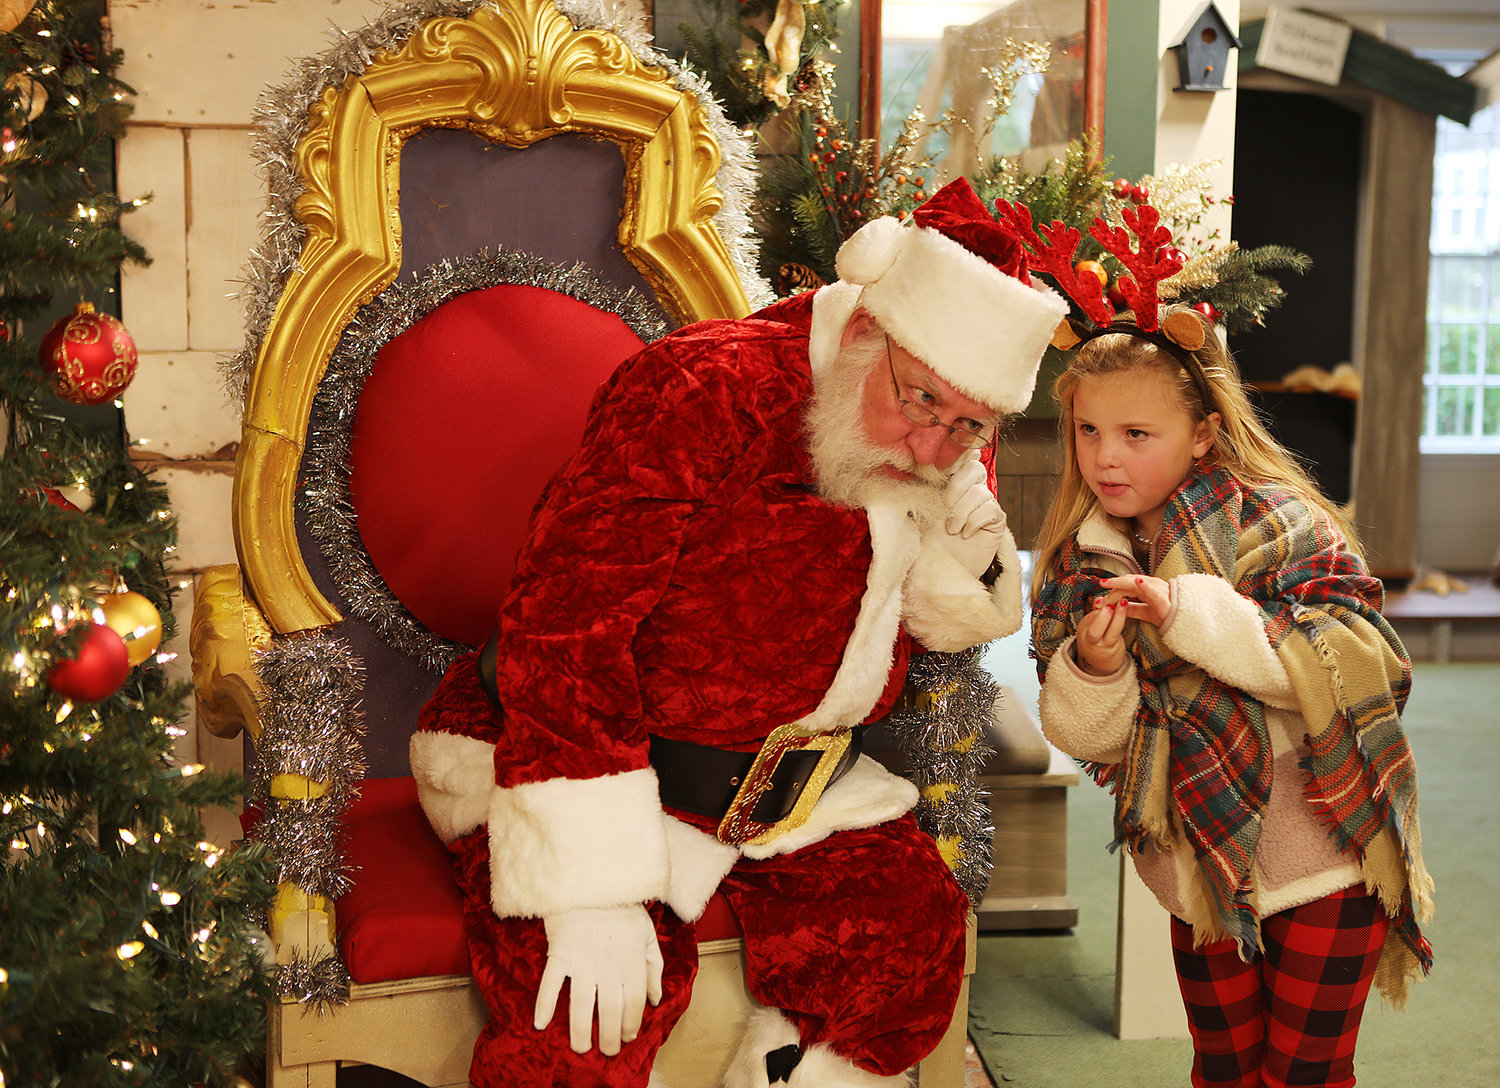 DECEMBER 3, 2022 -- Santa listens closely to the wishes of a young girl in the Discovery Room of the Whaling Museum during Christmas Stroll on Main Street. Photo by Ray K. Saunders